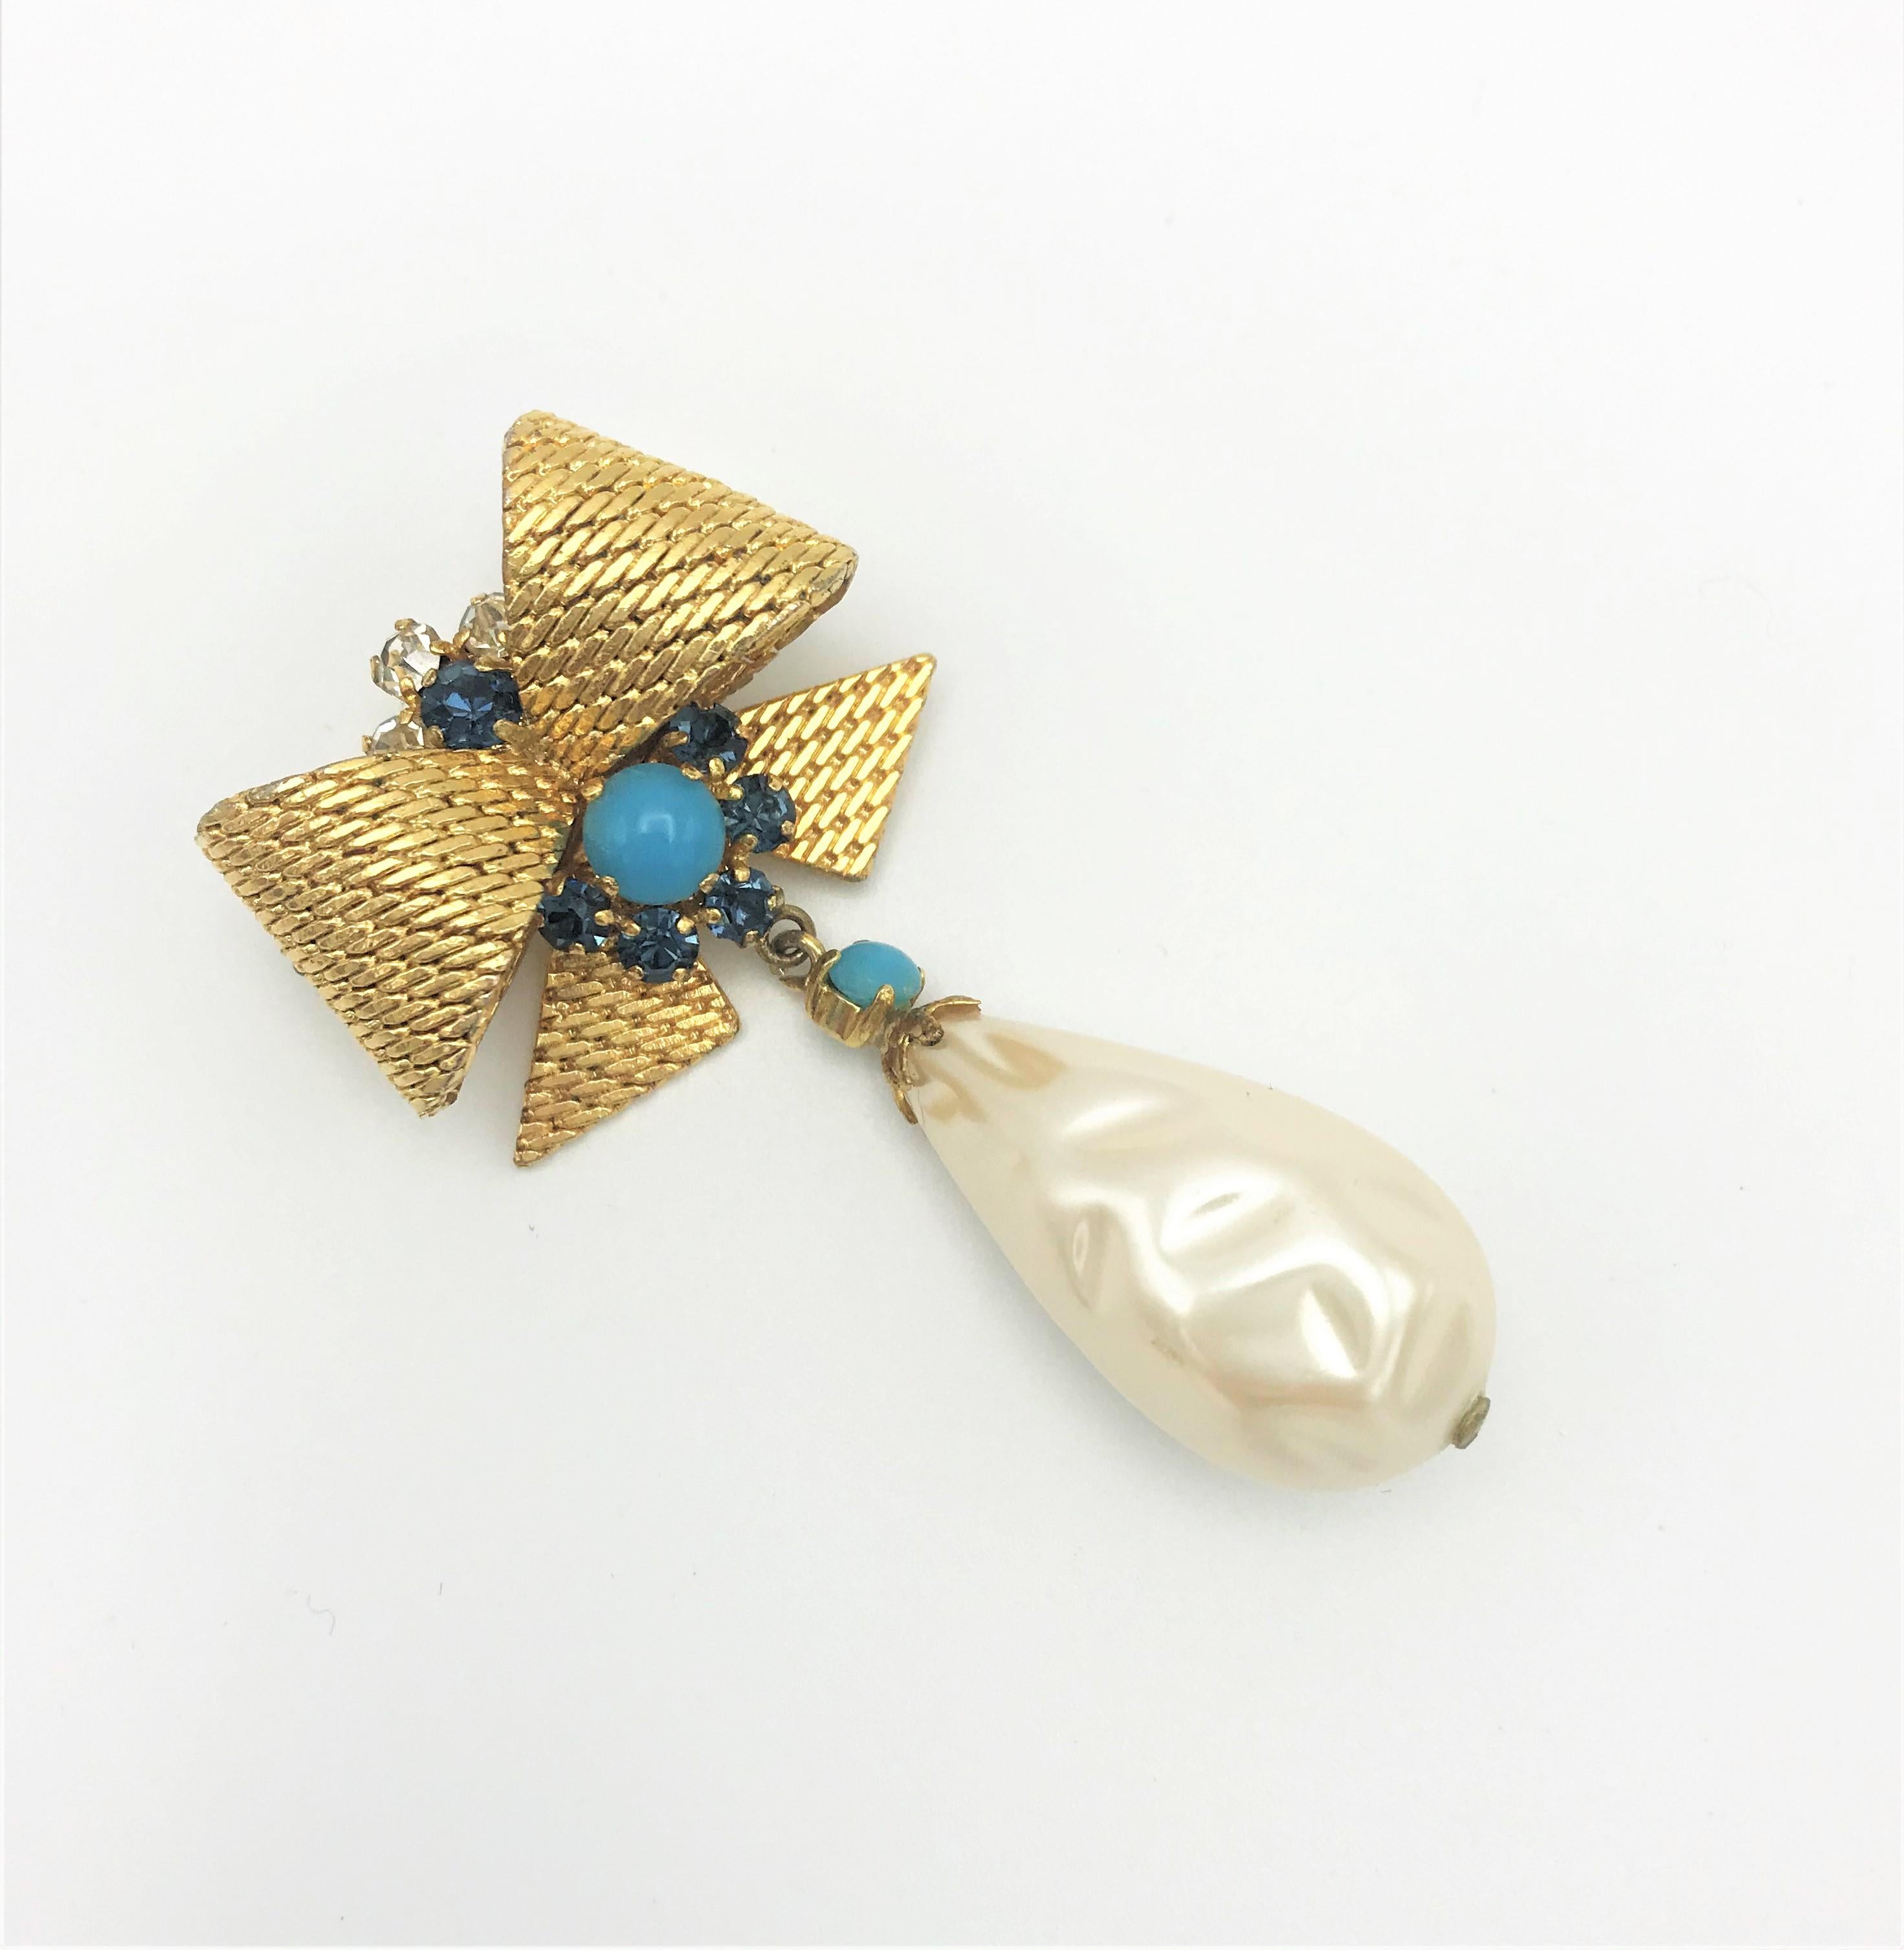 A very early ribbon brooch by Christian Dior with a large pendant drop of barock pearls. The brooch is signed 1967 Christian Dior Germany. Ch. Dior began designing fashion and jewelry in the 1950s. Before he had a Art Galerie in Franc. 
Above the